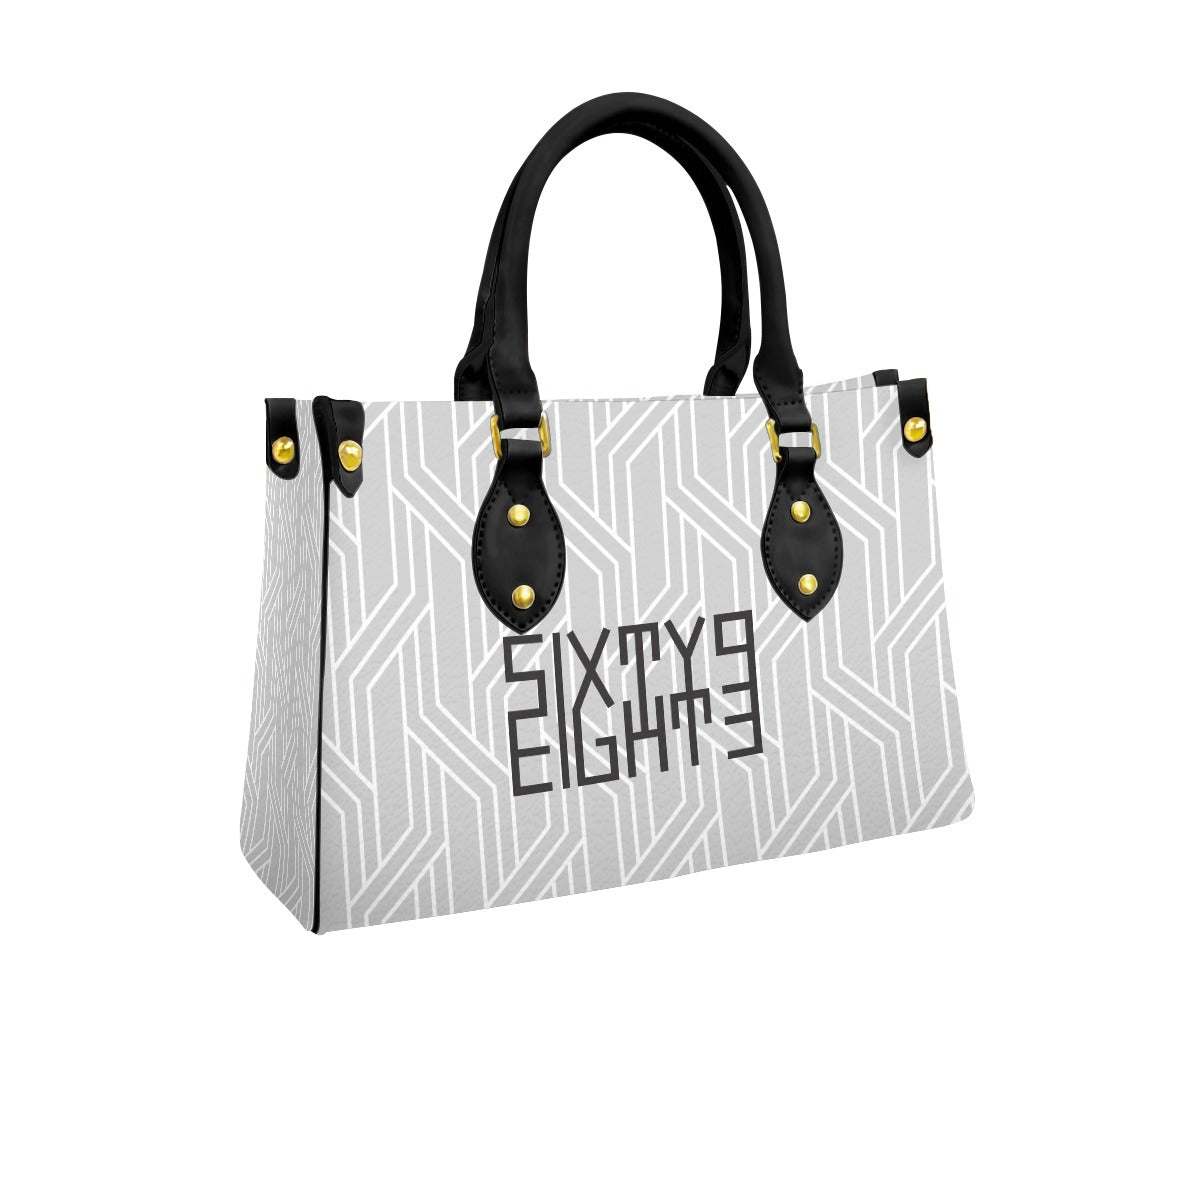 Sixty Eight 93 Logo Black Women's Tote Bag With Black Handle #11